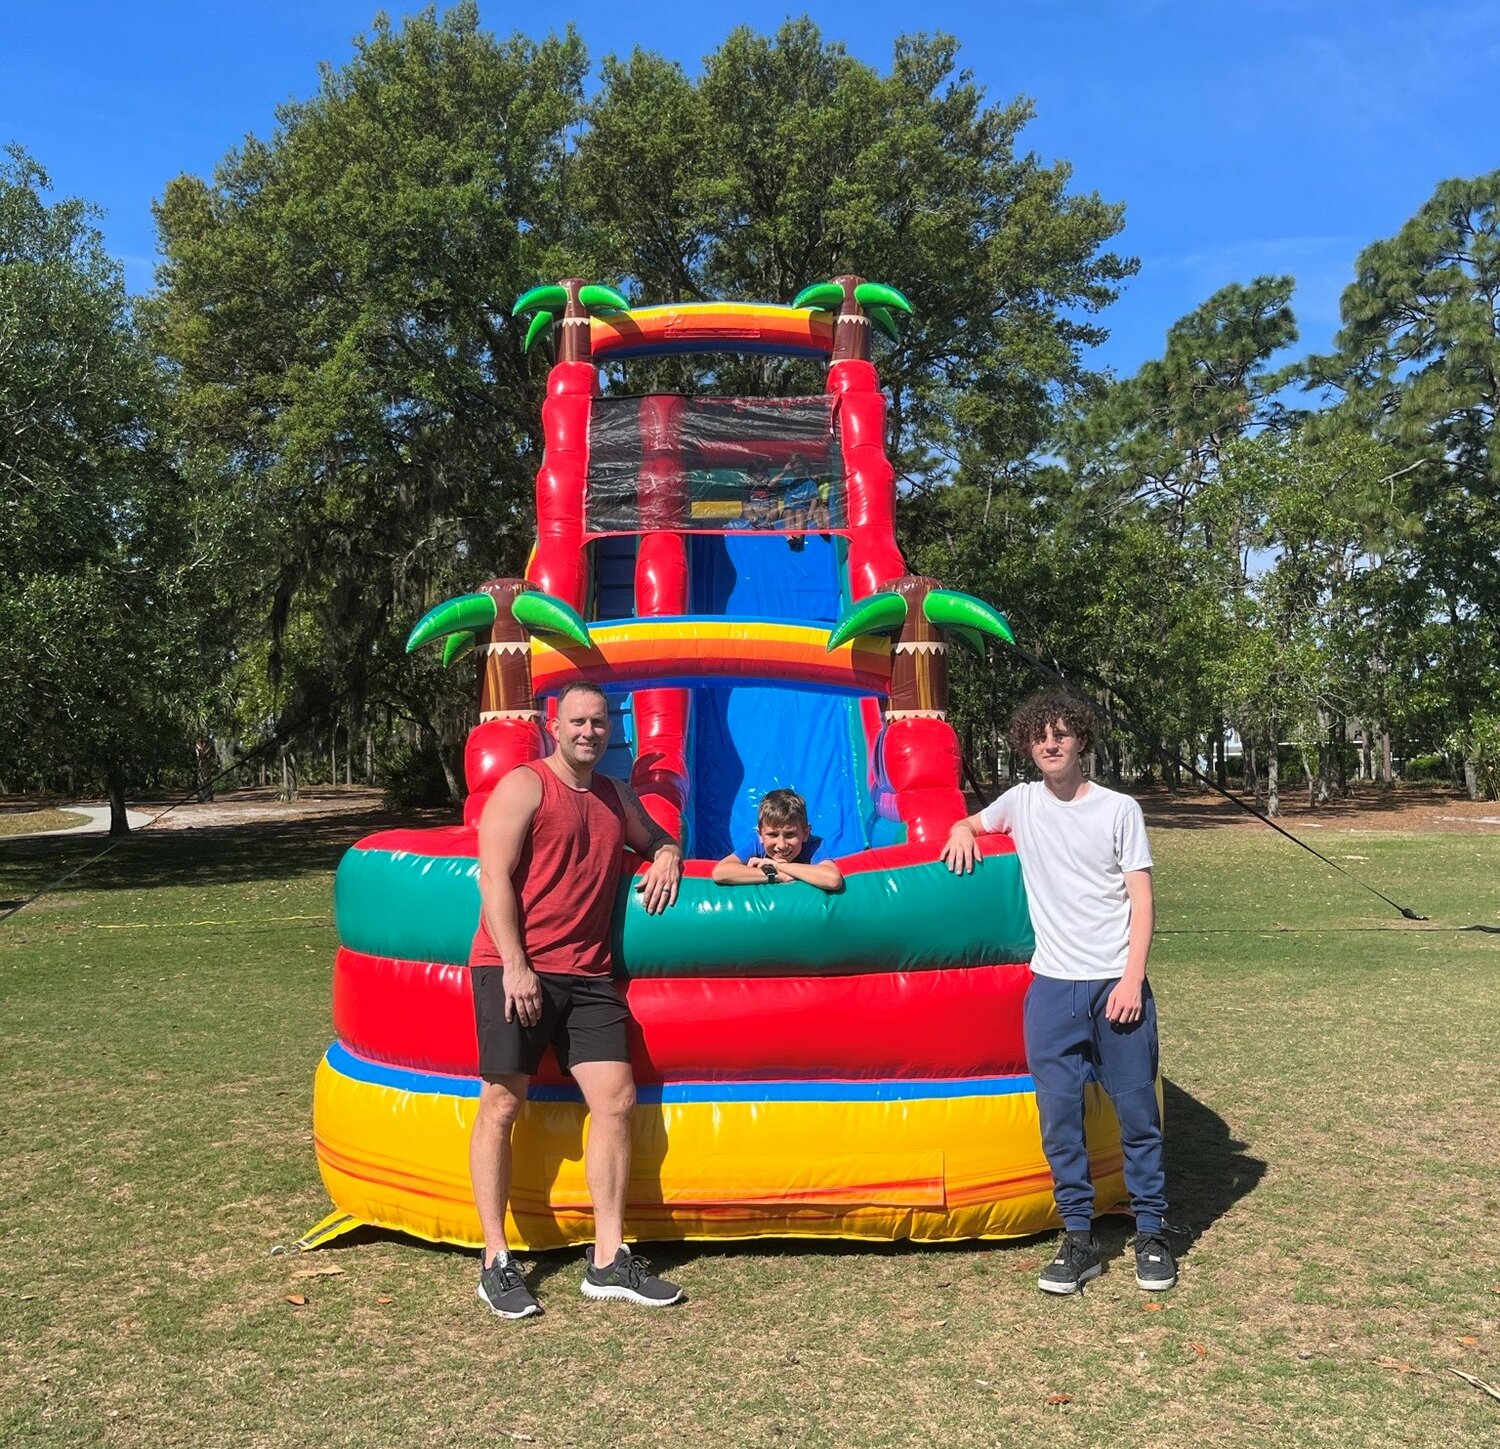 Adam White, Eli White and Rogan Drainer are seen with their 21-foot “volcano” slide.